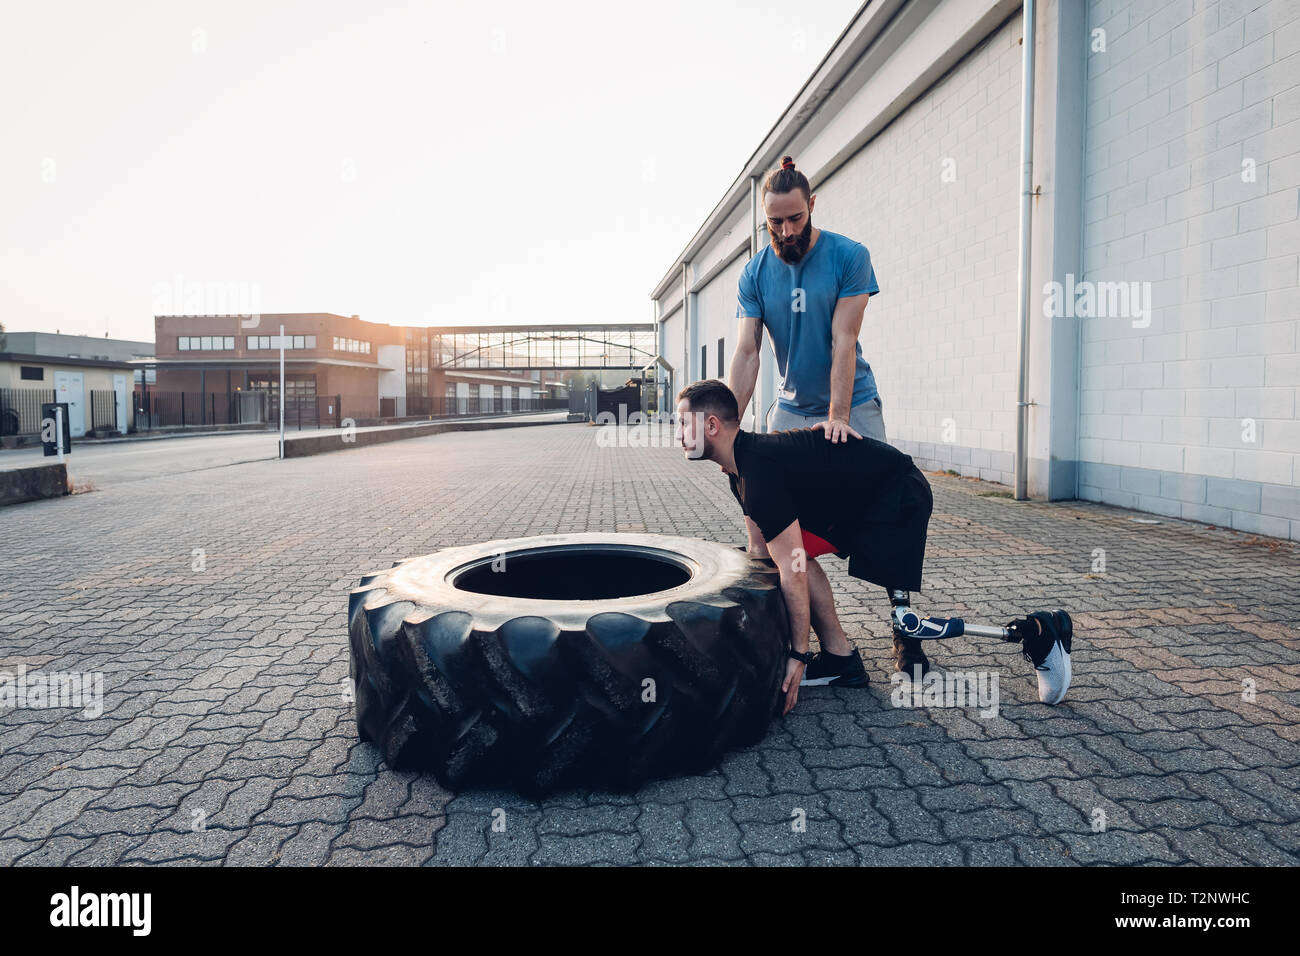 Man with prosthetic leg weight training with giant tyre Stock Photo